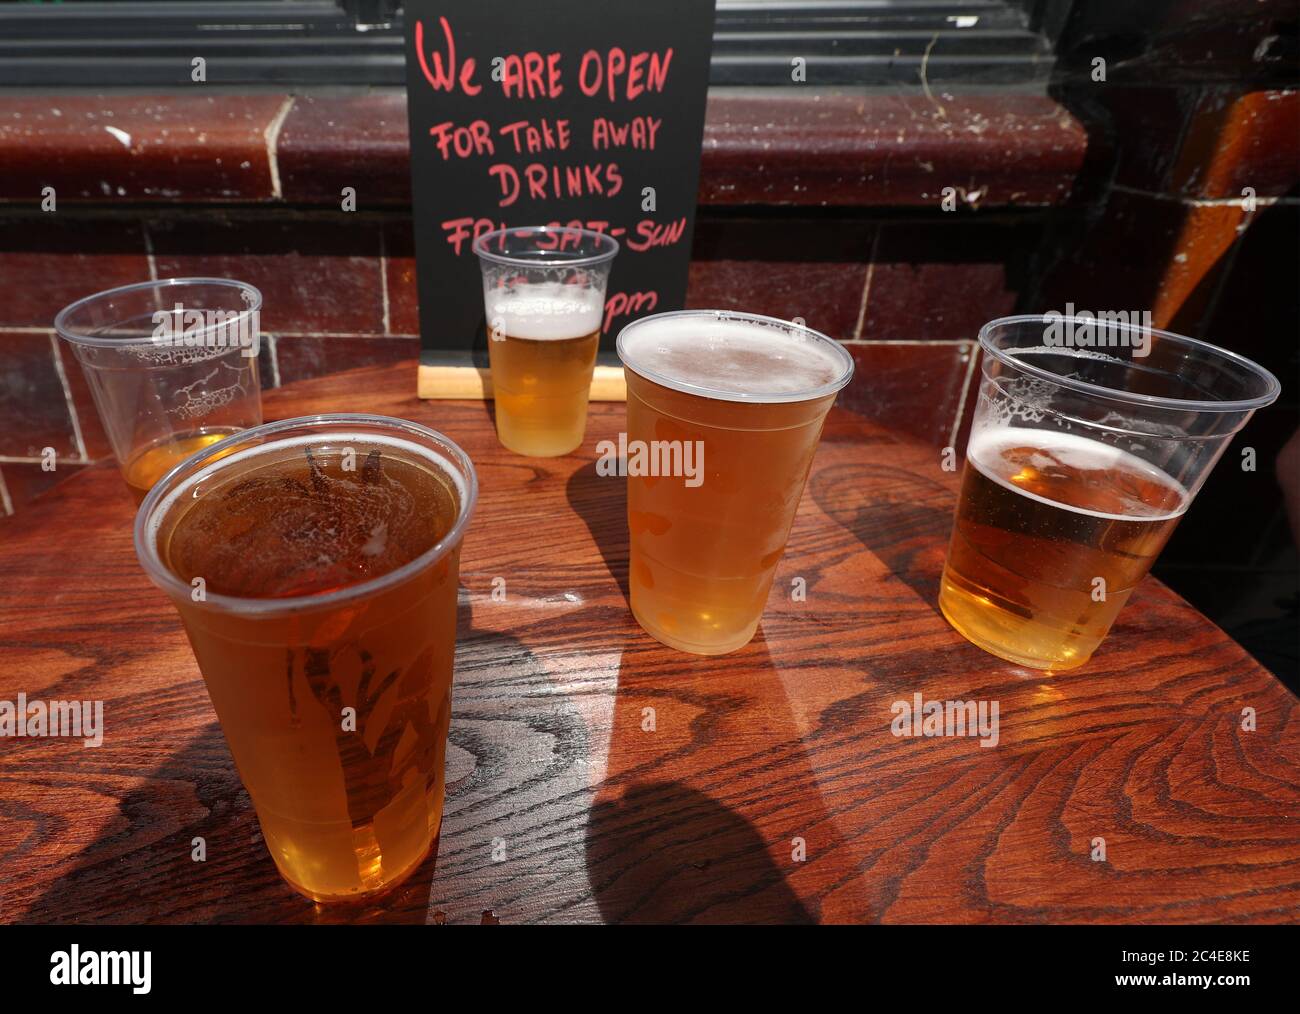 Takeaway pints of beer outside Charrington's Noted Ales And Stout pub in London, as further coronavirus lockdown restrictions are lifted in England. Stock Photo